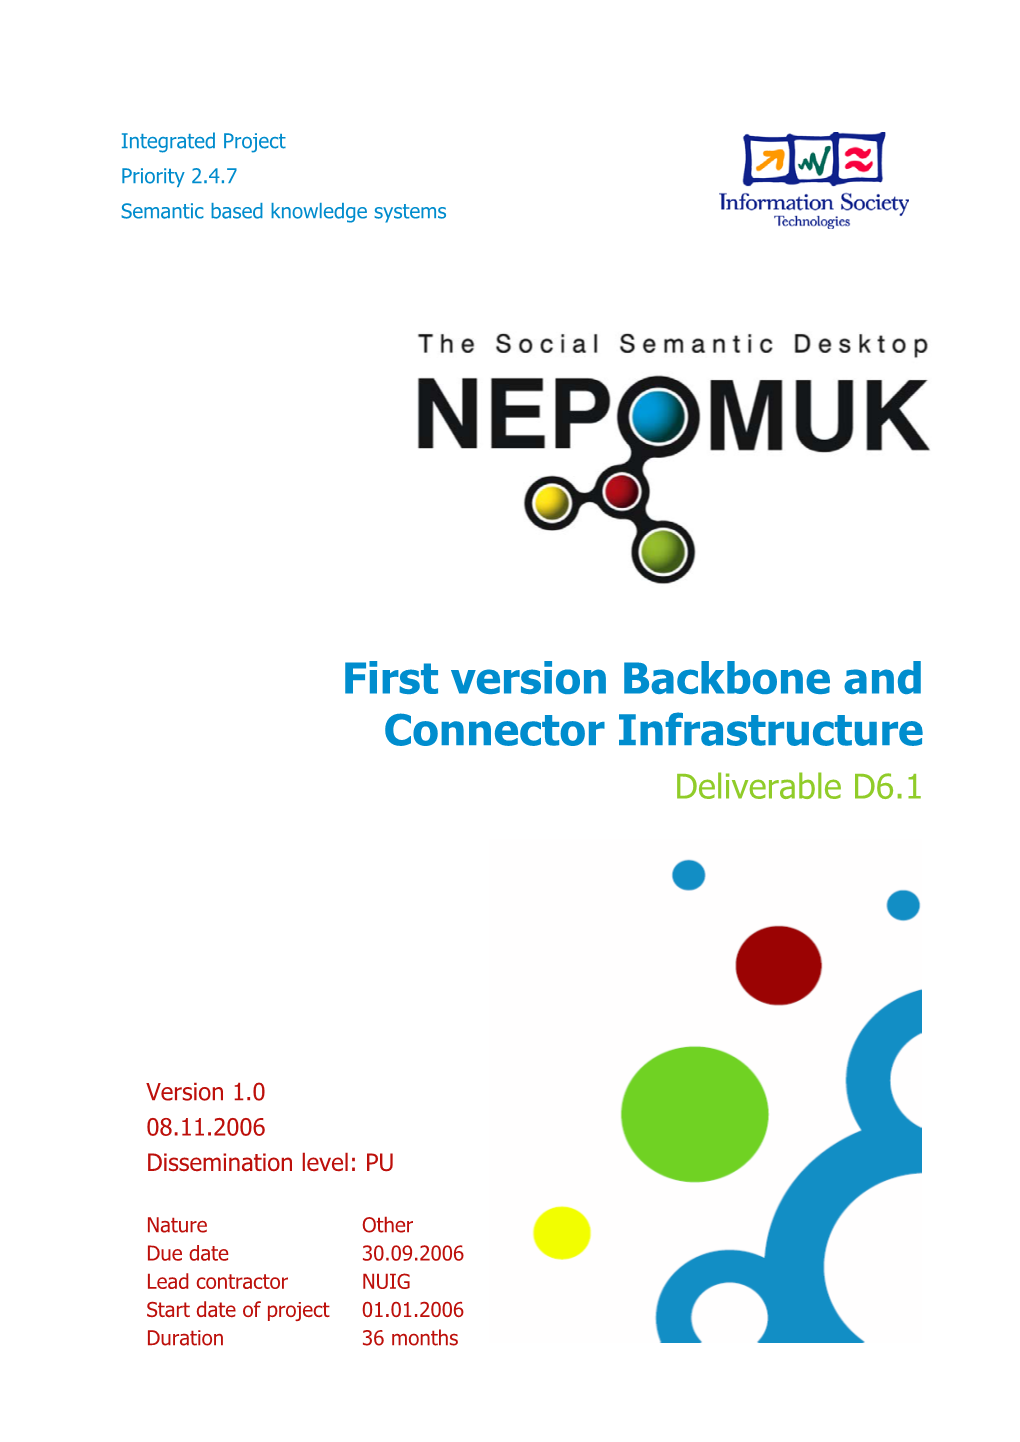 First Version Backbone and Connector Infrastructure Deliverable D6.1